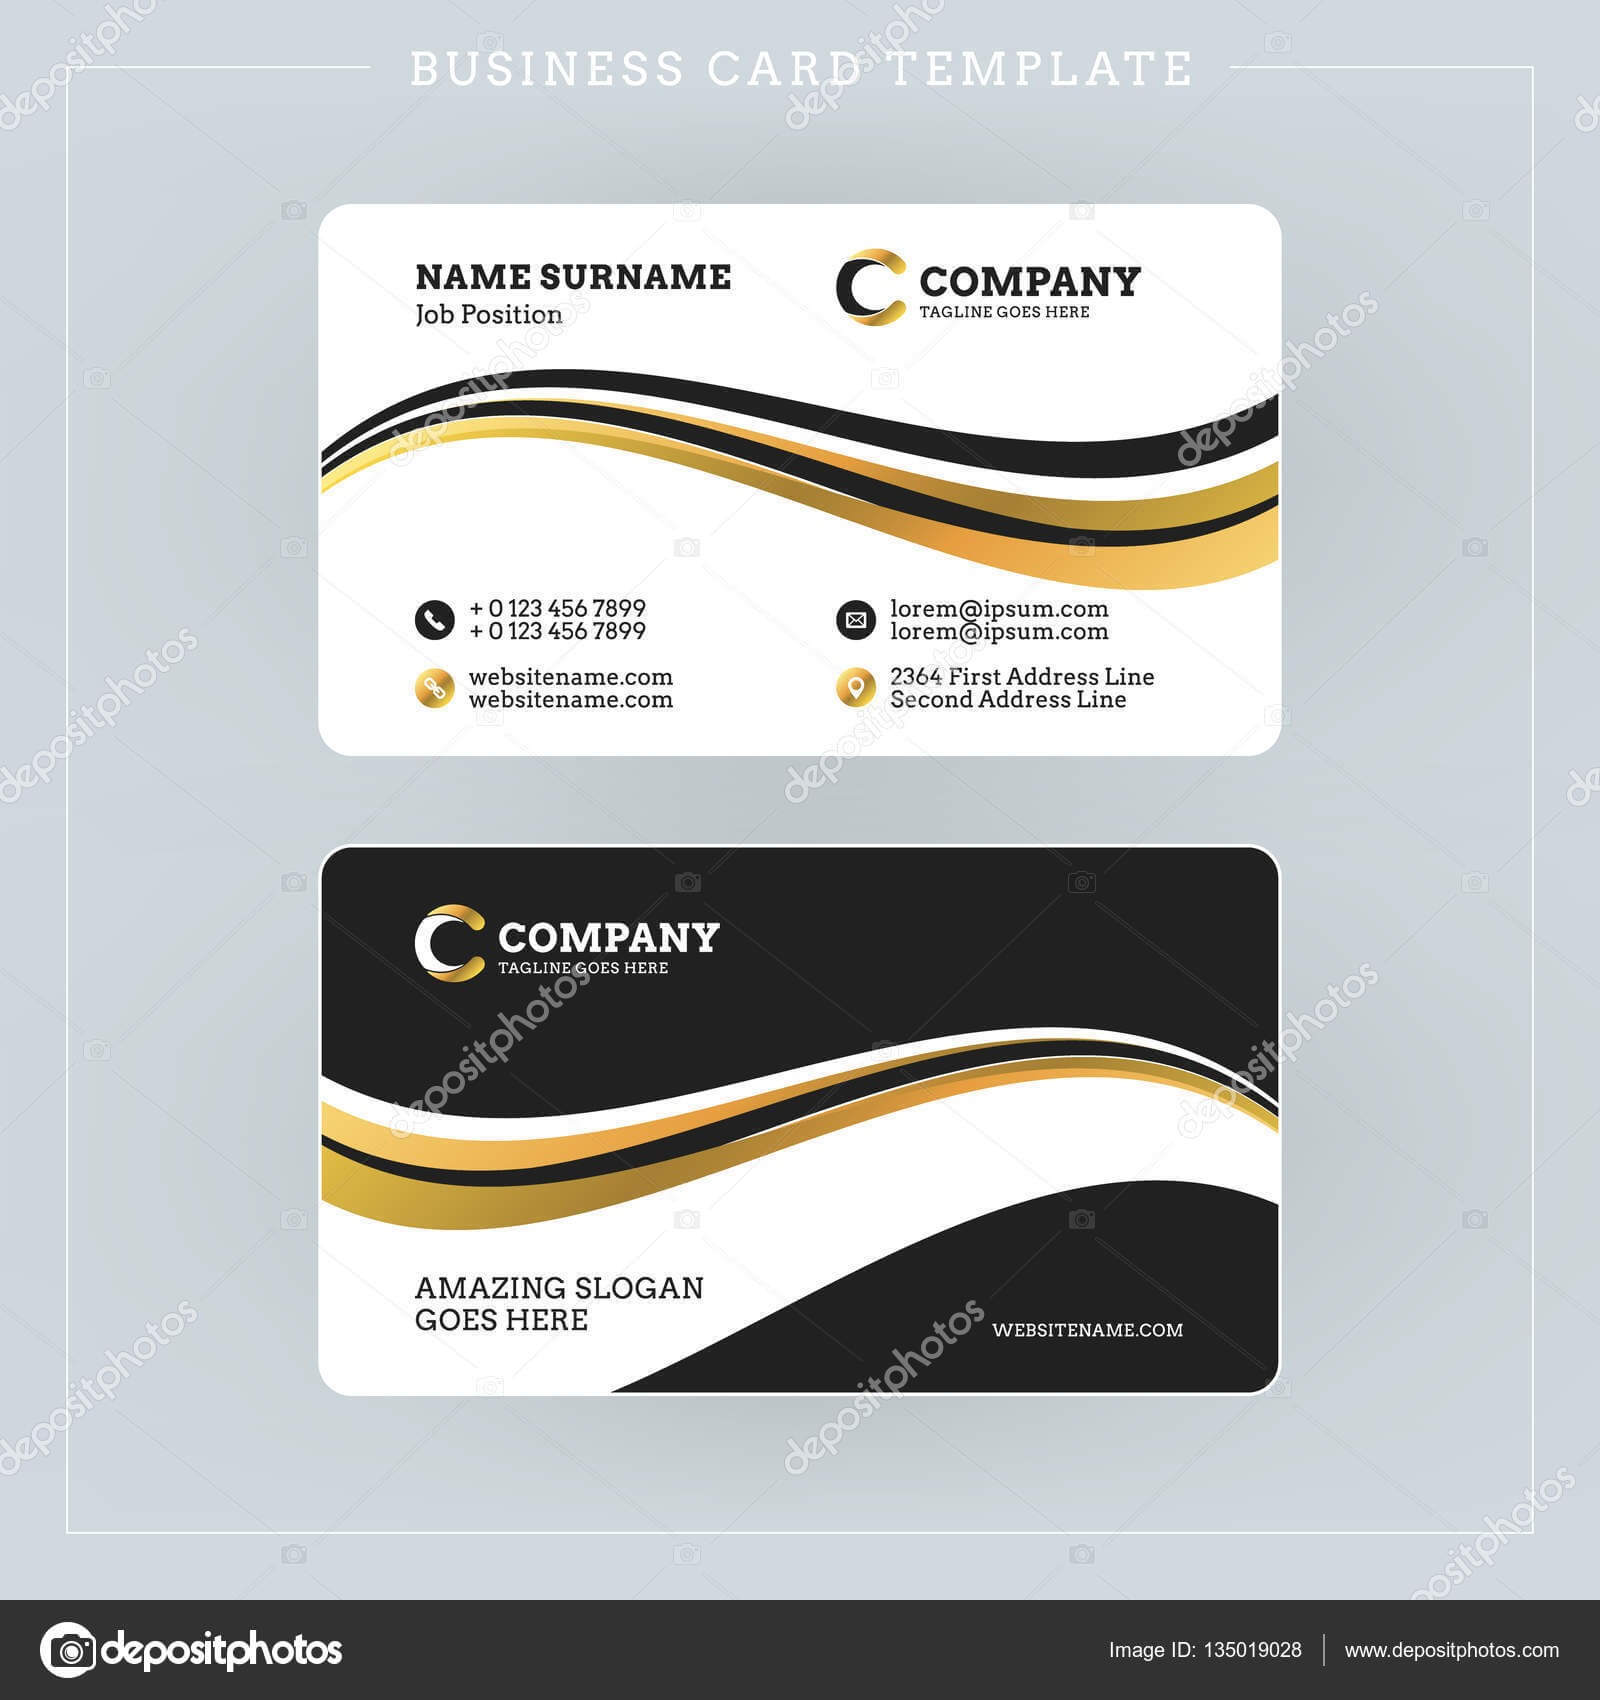 Two Sided Business Cards Template Word Uk Professional Intended For 2 Sided Business Card Template Word